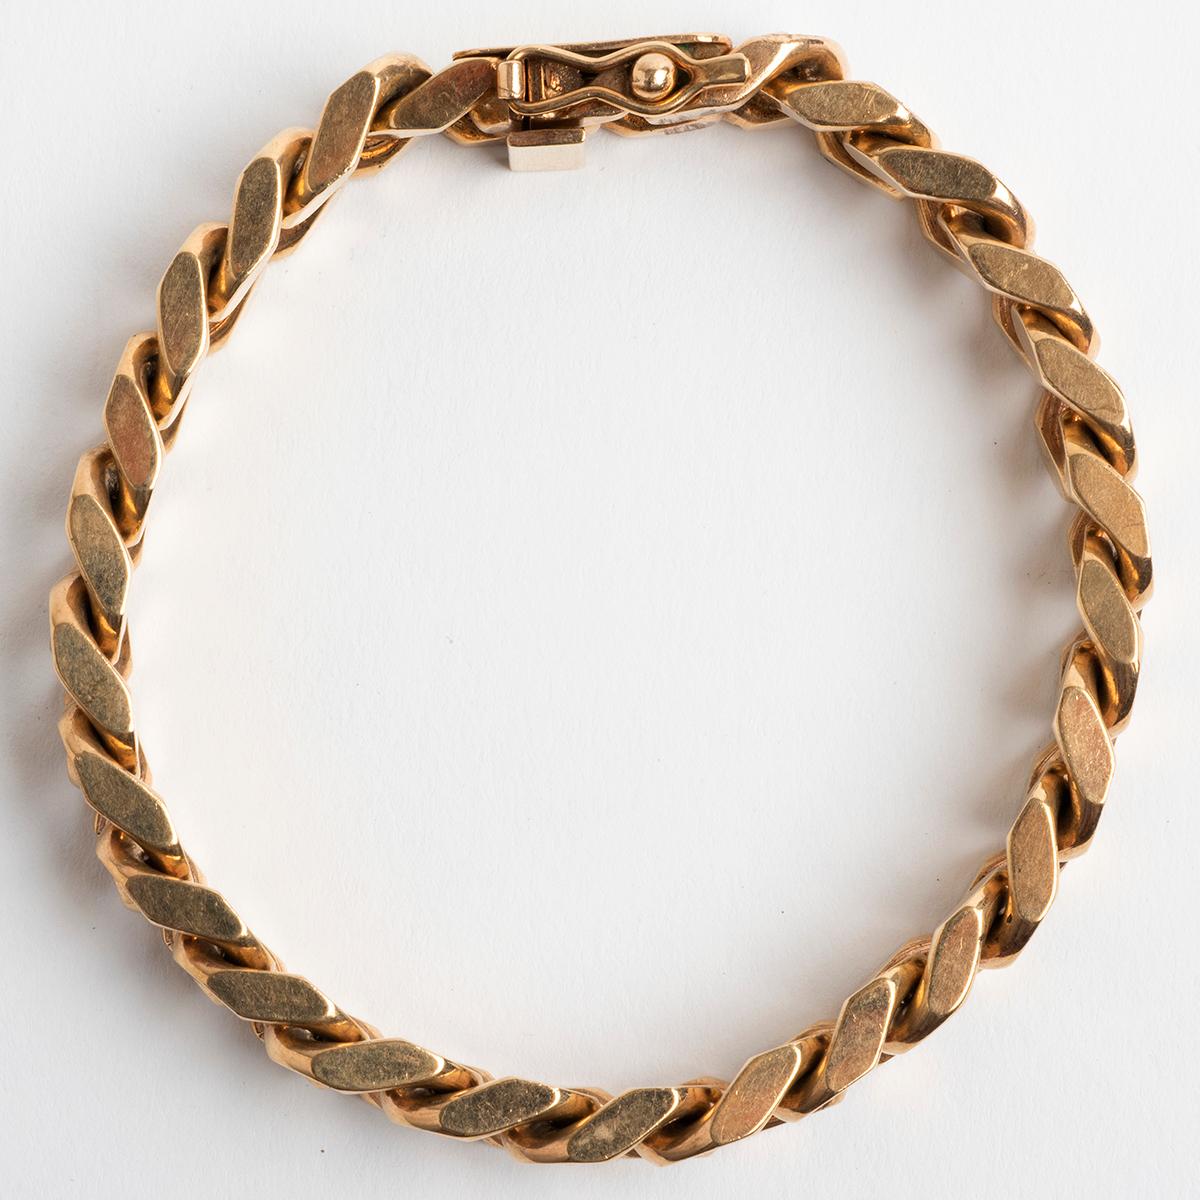 Our classic 9k yellow gold solid link curb bracelet has a box and tongue clasp with figure of eight safety. Total weight 53.8g and hallmarked Sheffield. We date to circa 1970s. Length is 19cm.

A unique piece within our carefully curated Vintage &